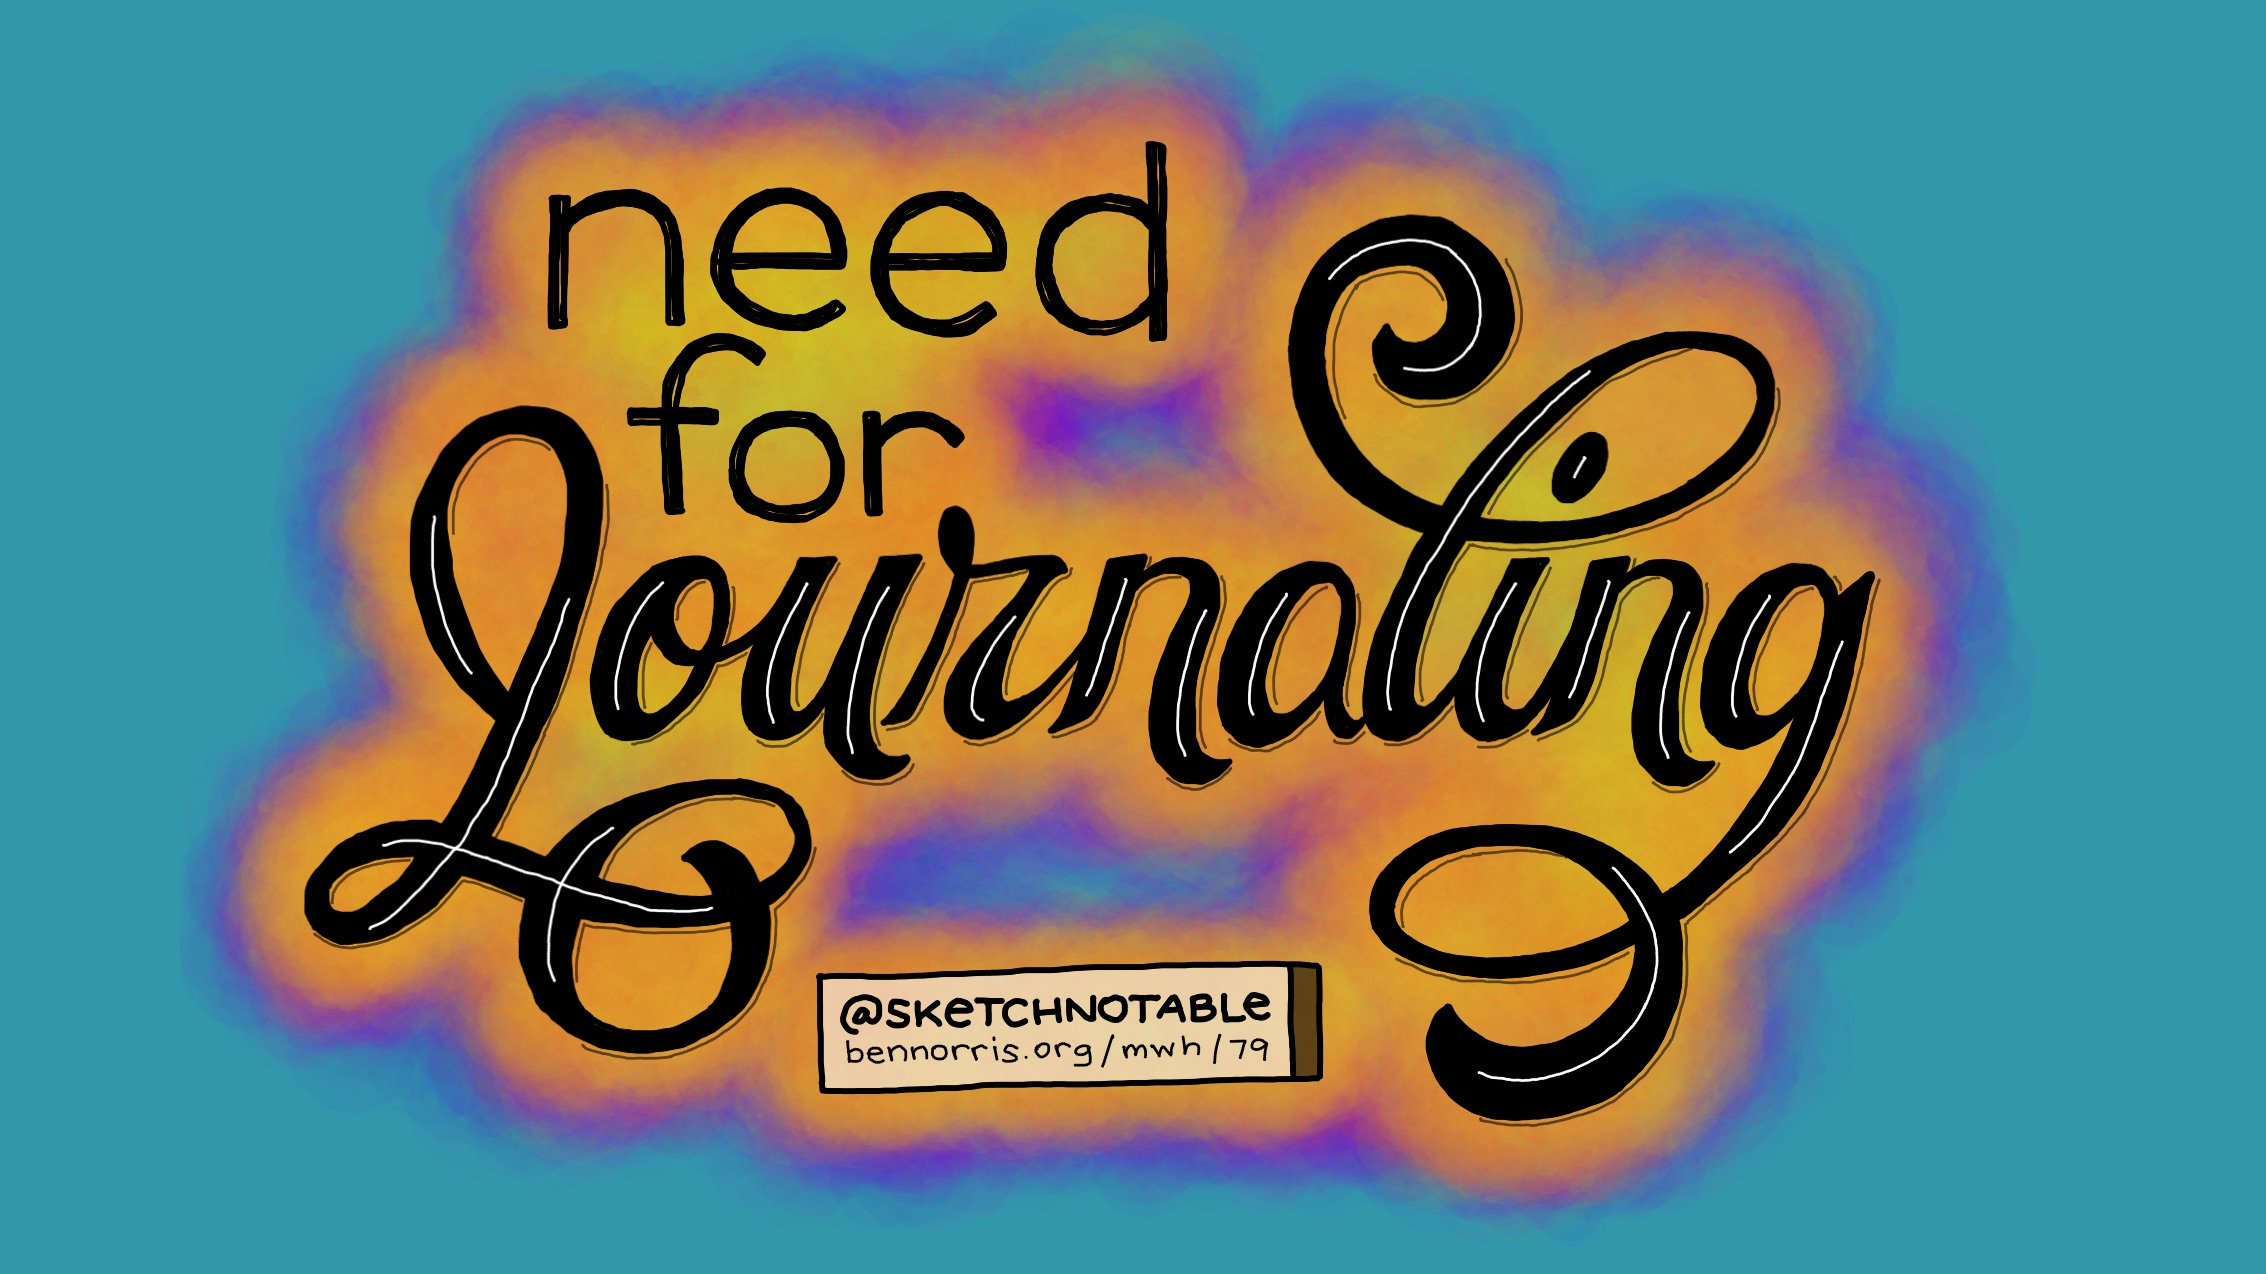 #79: Need for journaling